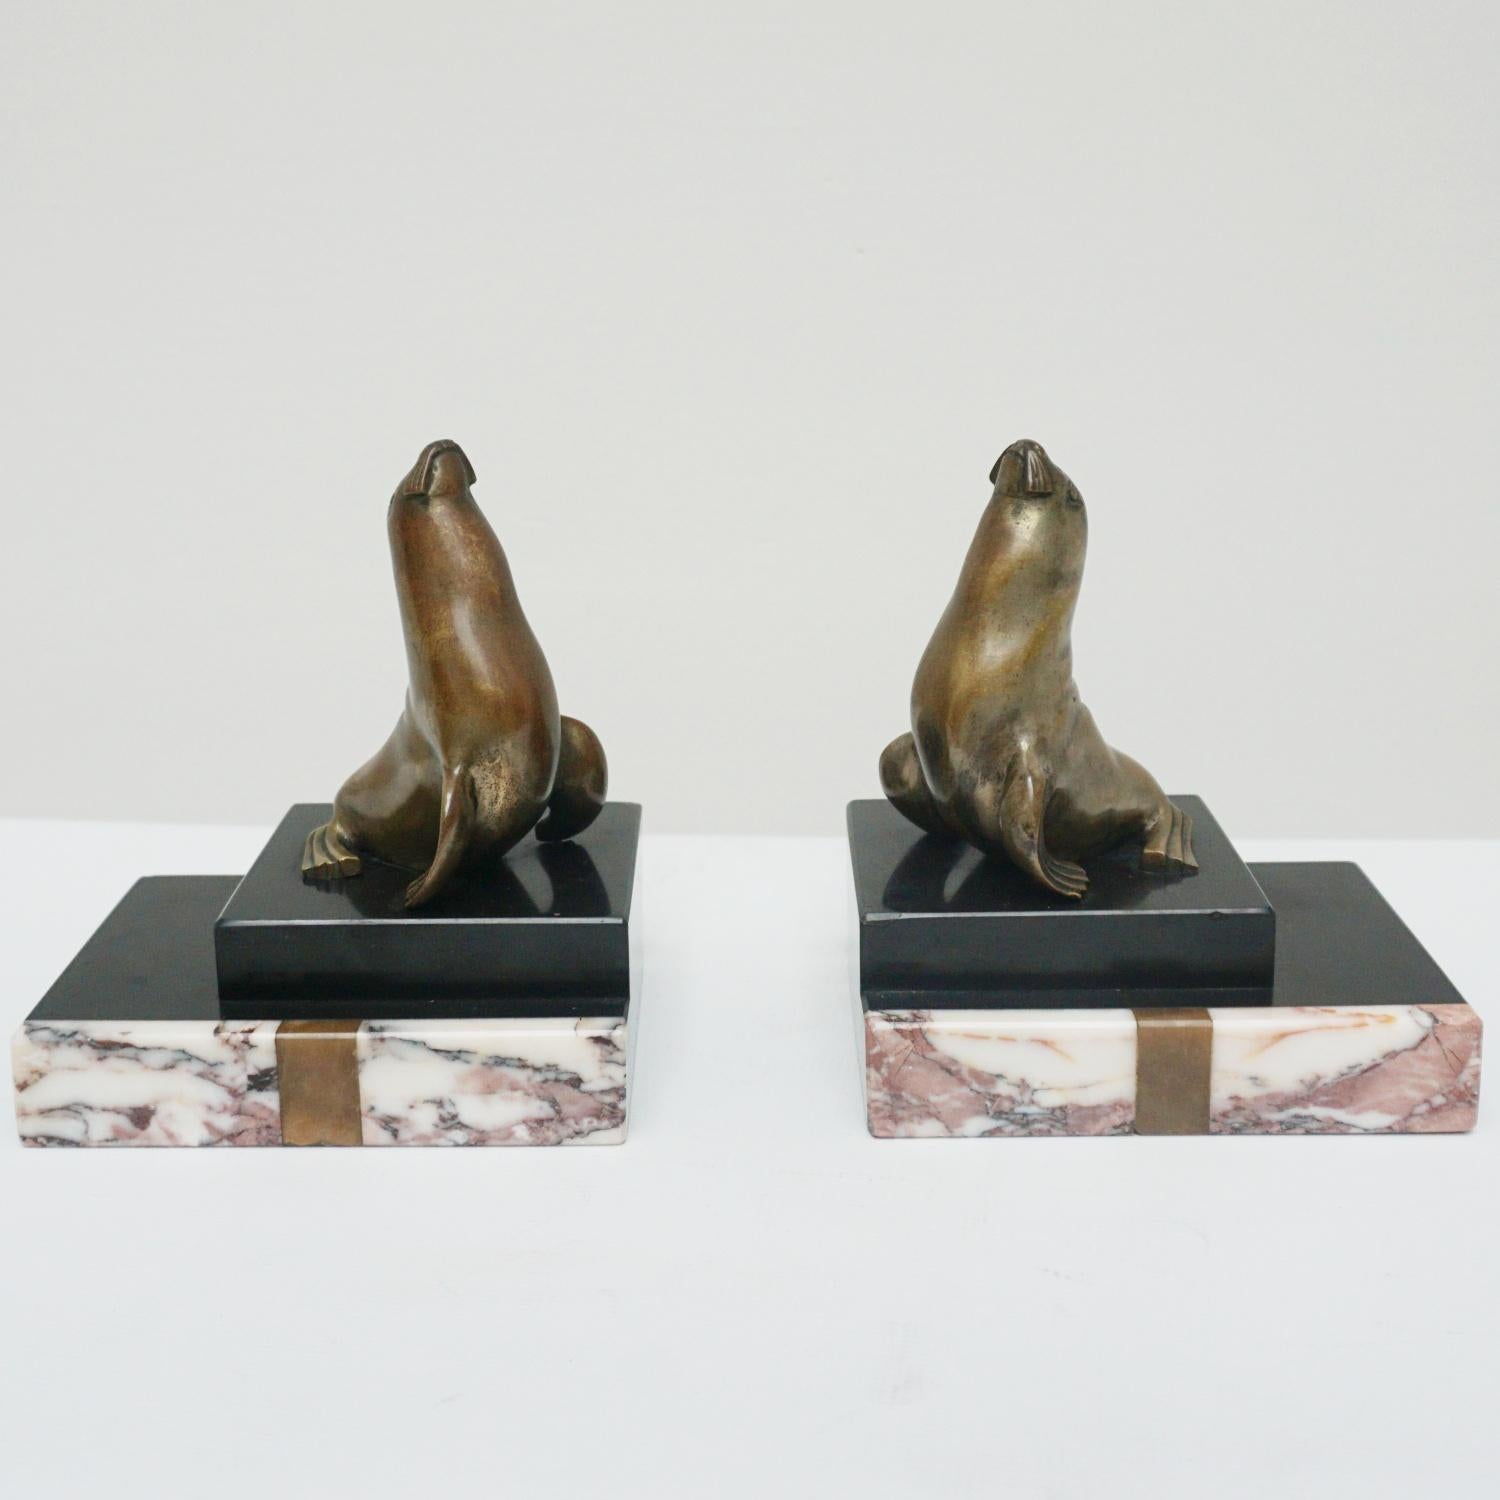 A pair of Art Deco bookends. Bronze sea lions set over a black marble base with front patterned marble edge. 

Dimensions: H 17cm W 15cm D 11cm.

Origin: French.

Date: circa 1930.

Item number: 2405229.